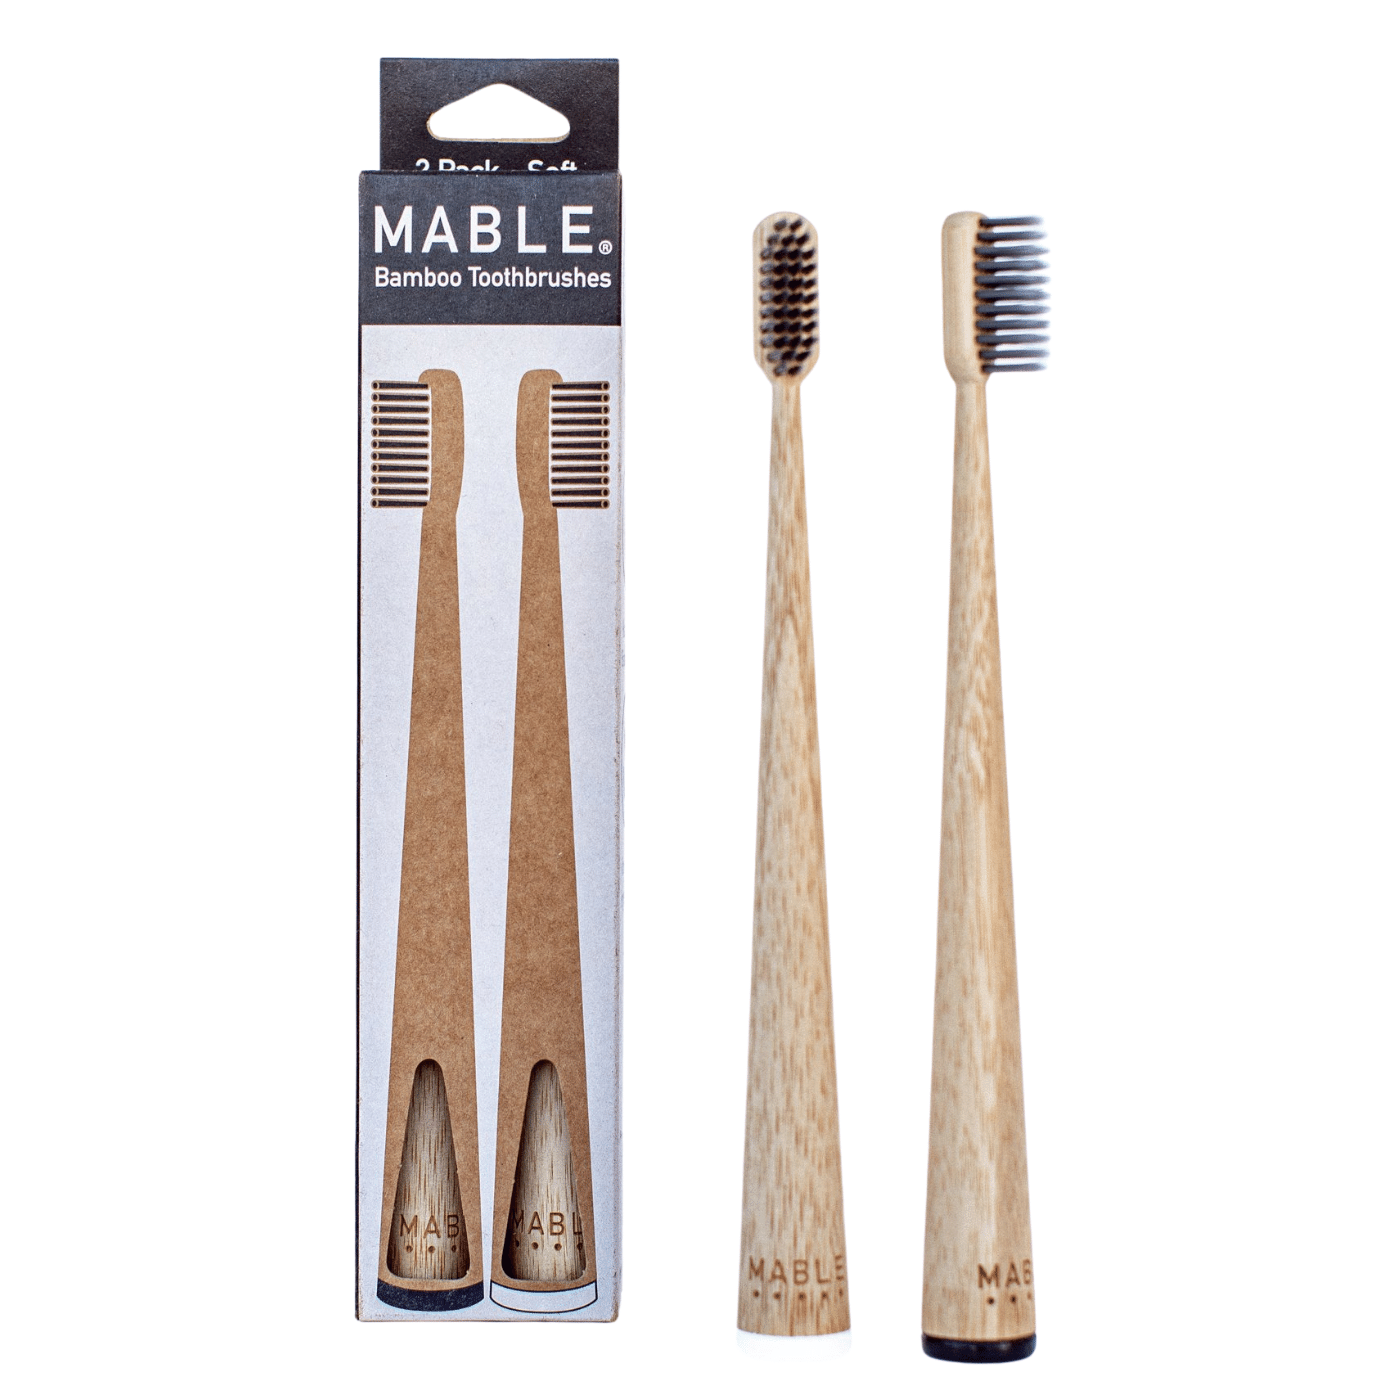 Mable toothbrush packs - Two pack charcoal toothbrushes: Two of our elegant, ergonomic, self-standing bamboo toothbushes in black and white. Soft bristles infused with 5% charcoal, which naturally helps detoxify and whiten your teeth.